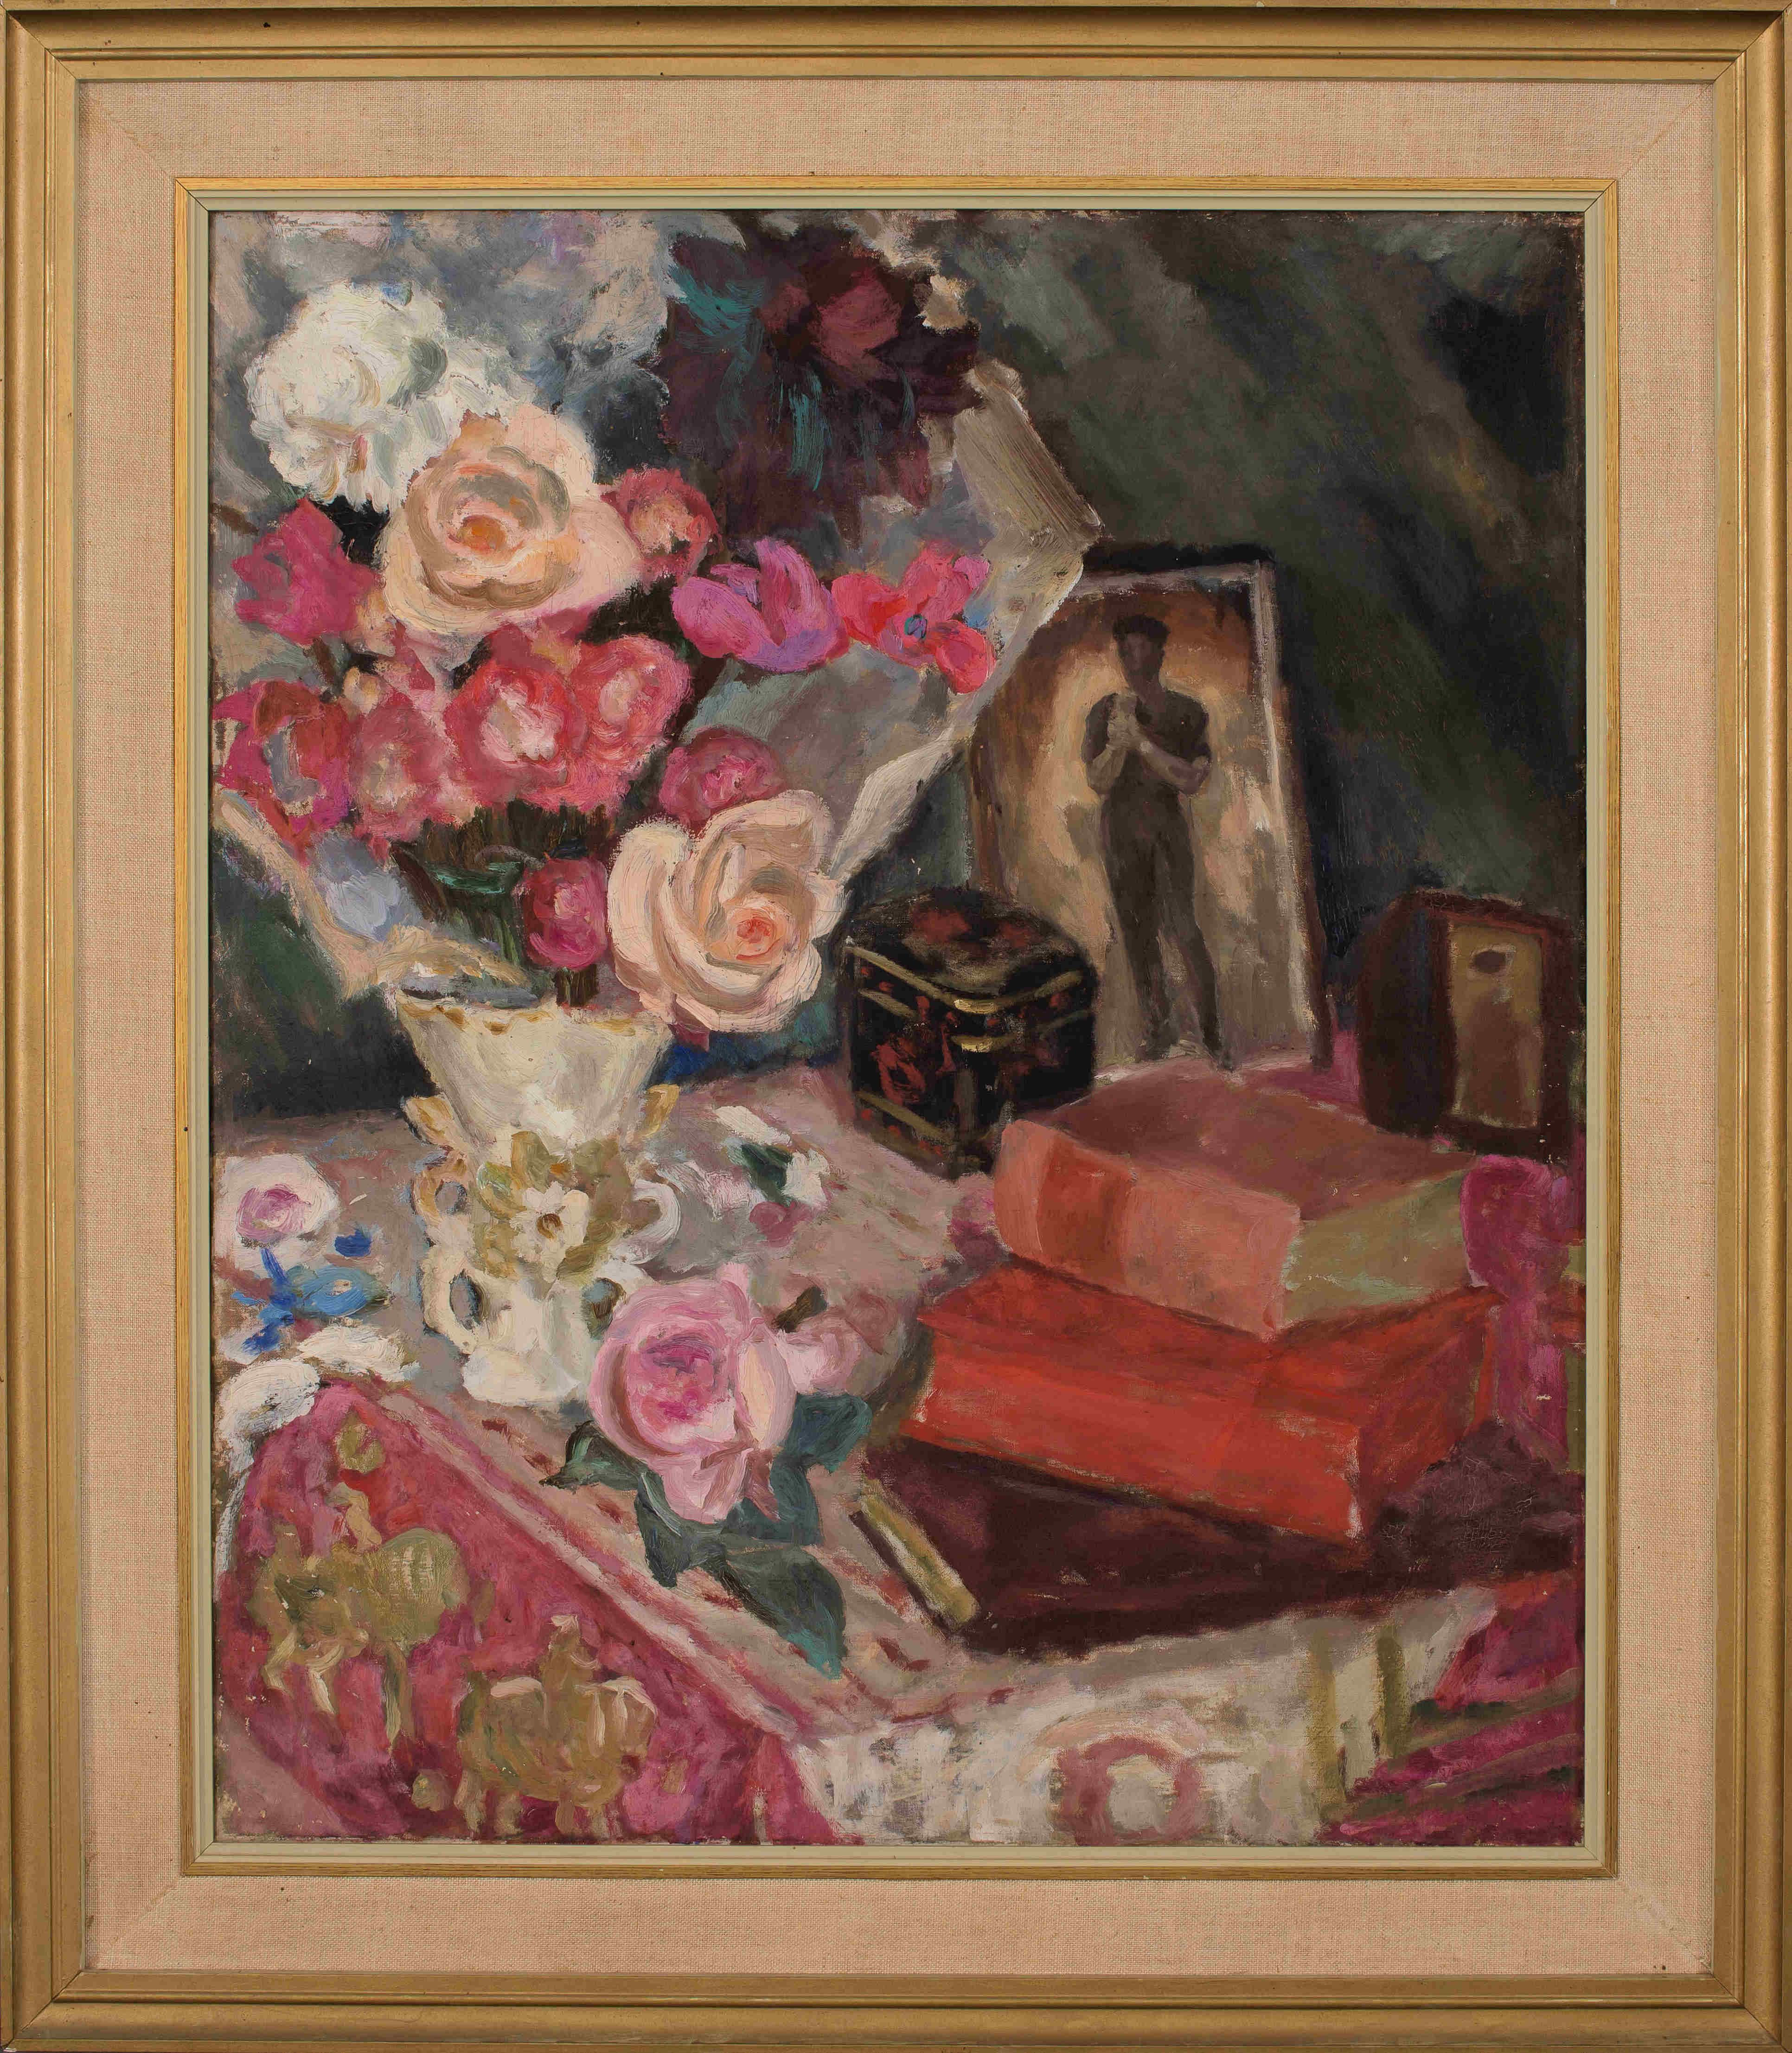 Maud Sumner; Still Life with Roses, Books and a Photograph